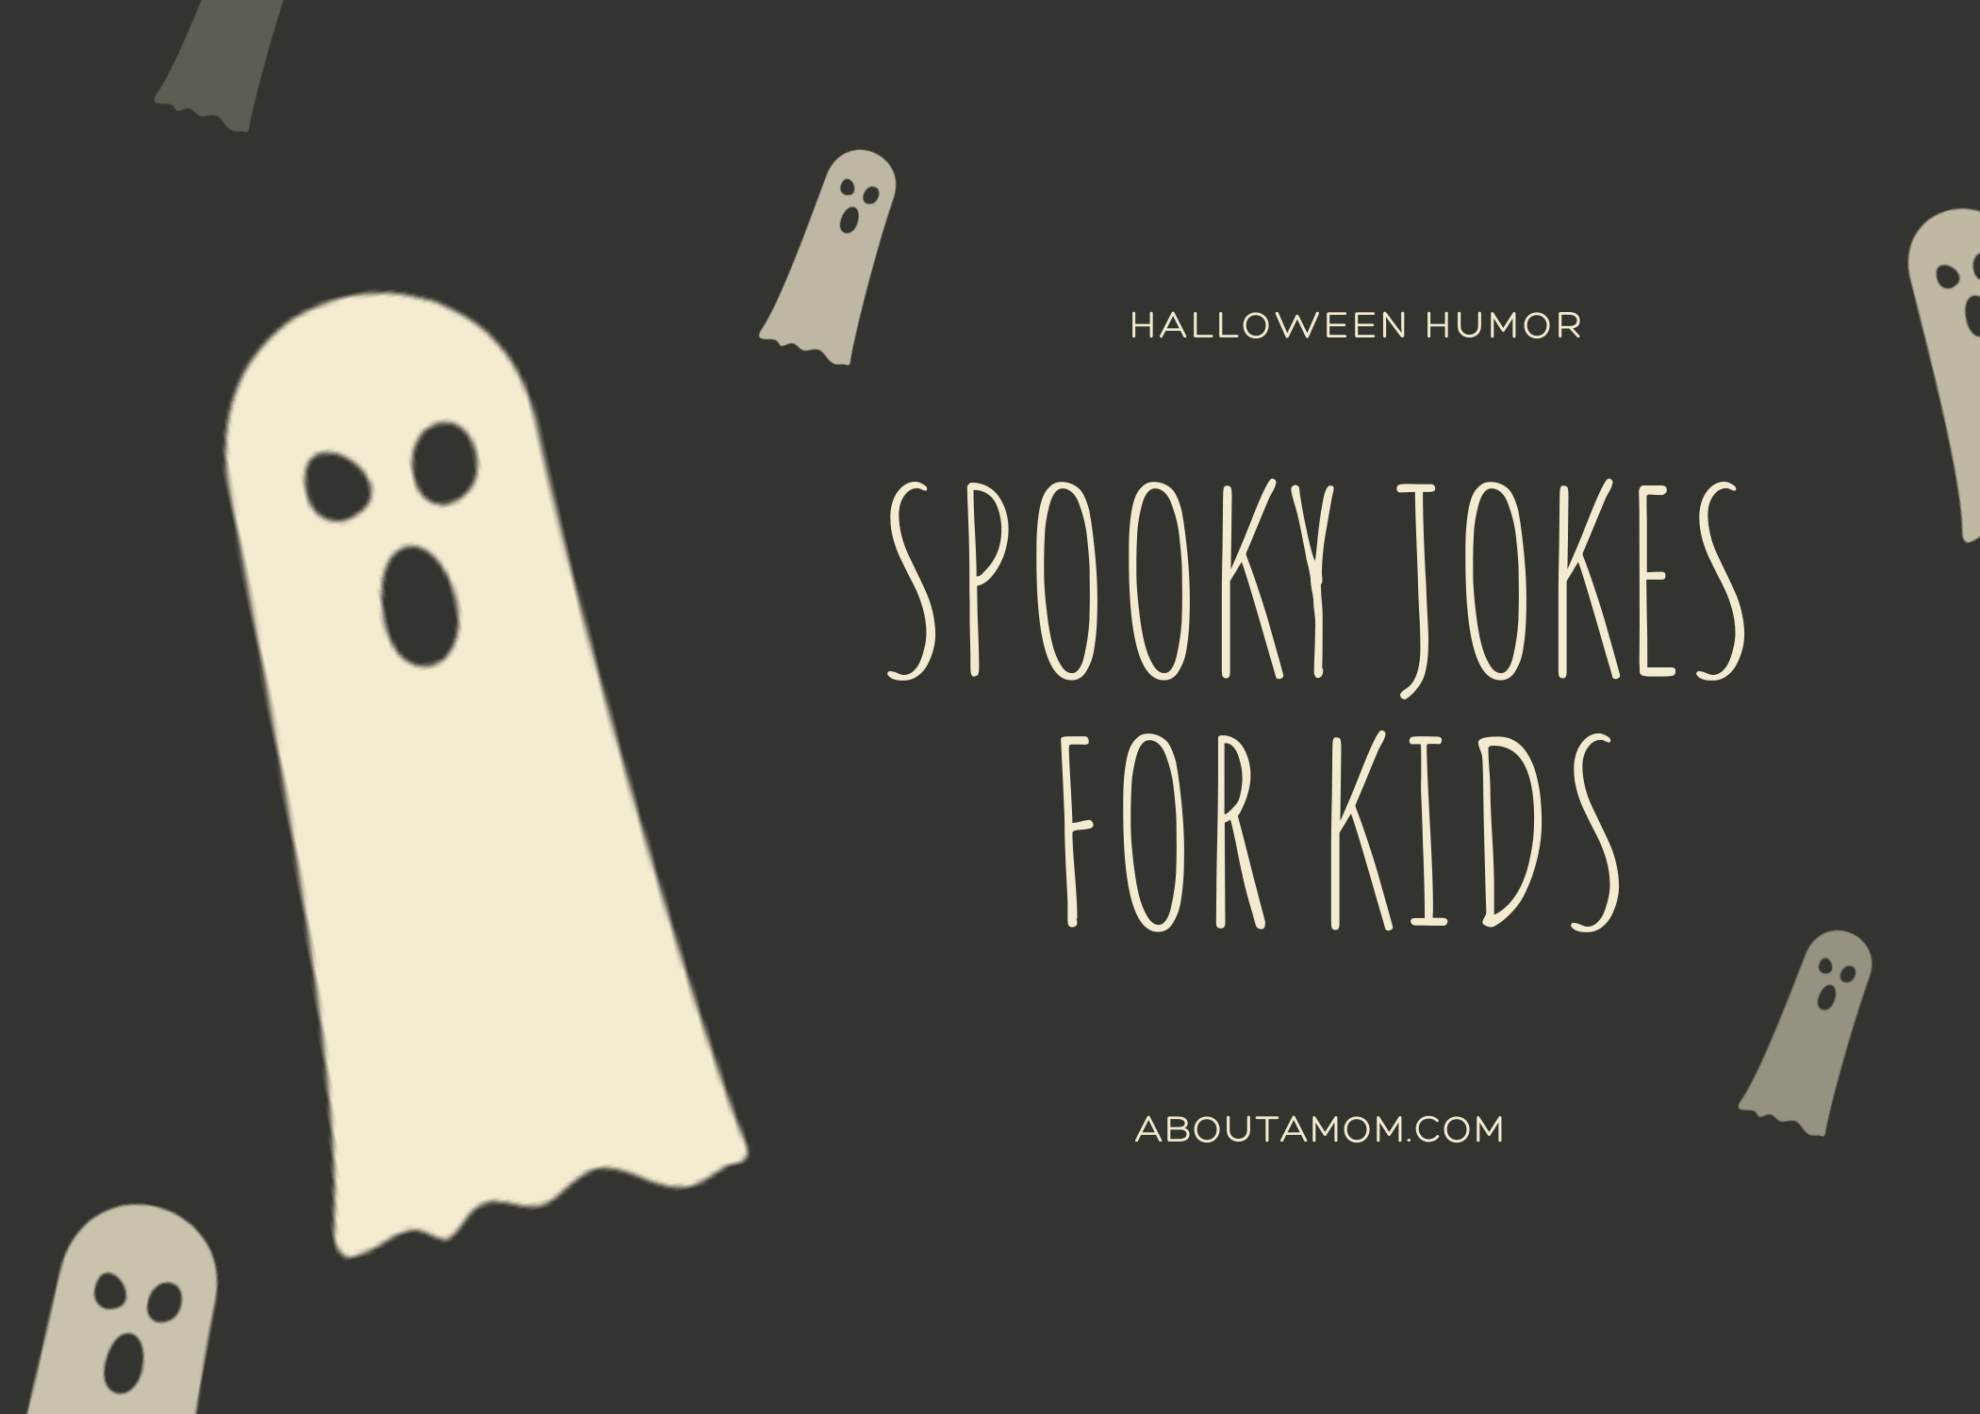 In need of some good, clean Halloween humor? Here are some spooky and oh-so funny Halloween jokes for kids: